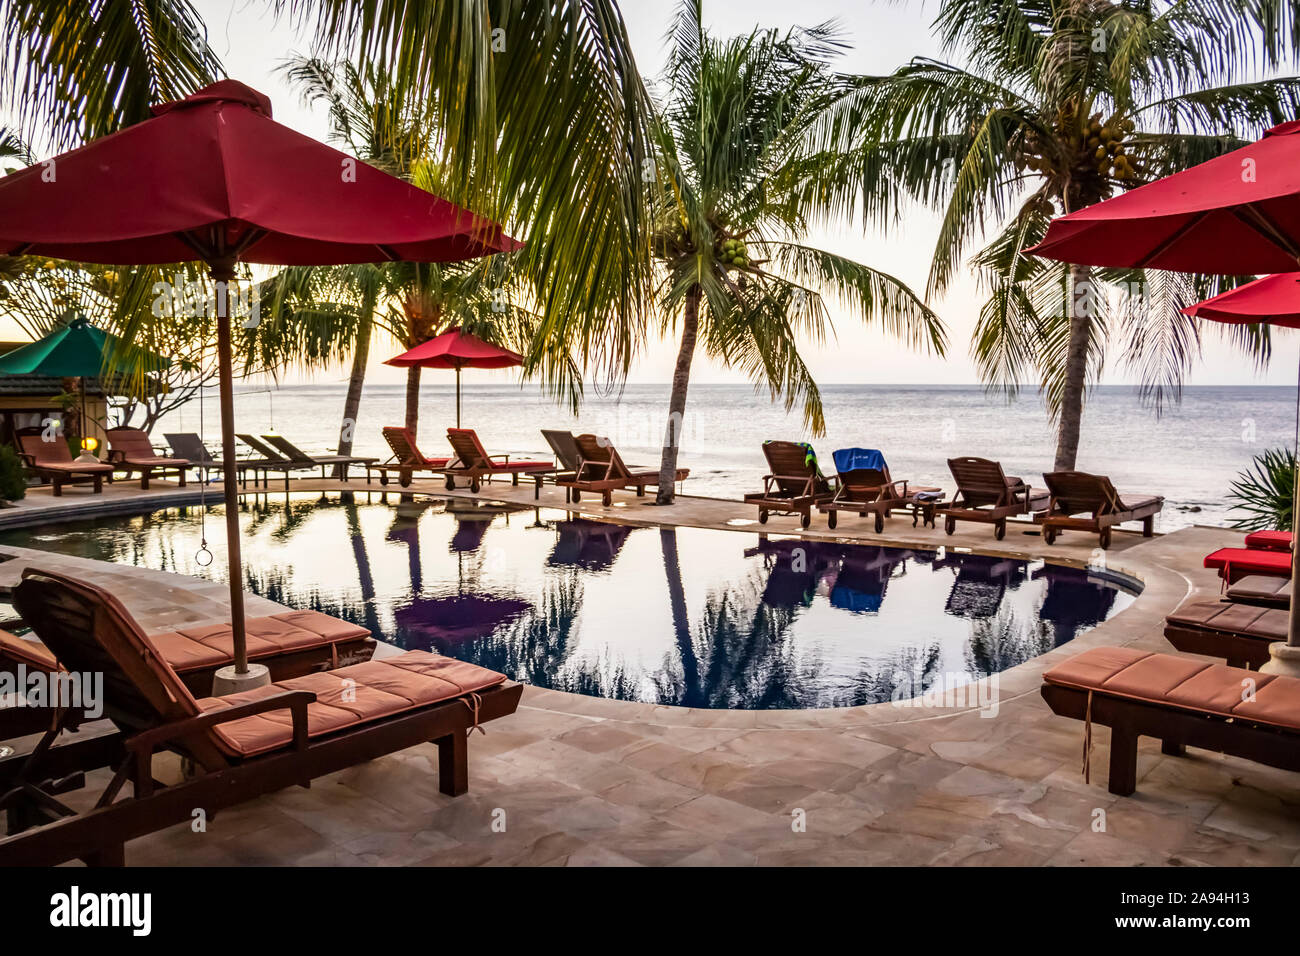 Swimming pool at a resort; Amed, Bali, Indonesia Stock Photo